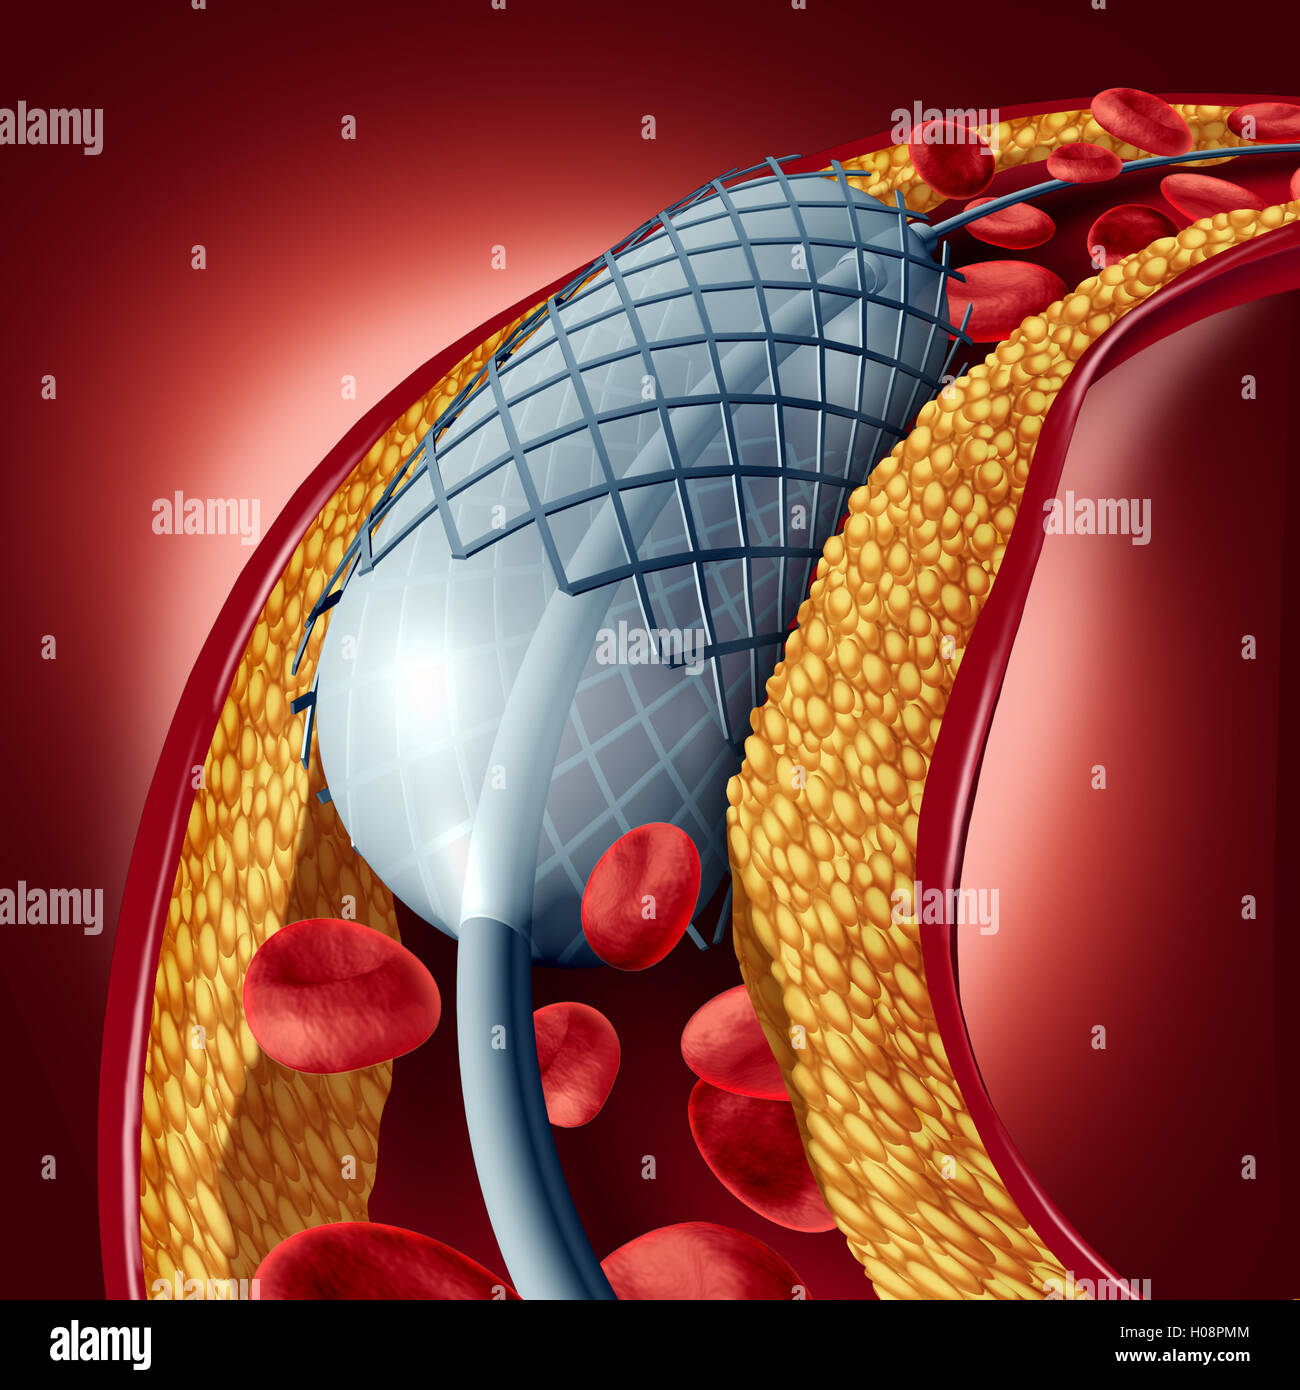 Angioplasty and stent concept as a heart disease treatment symbol with an implant in an artery that has cholesterol plaque blockage being opened for increased blood flow as a 3D illustration. Stock Photo